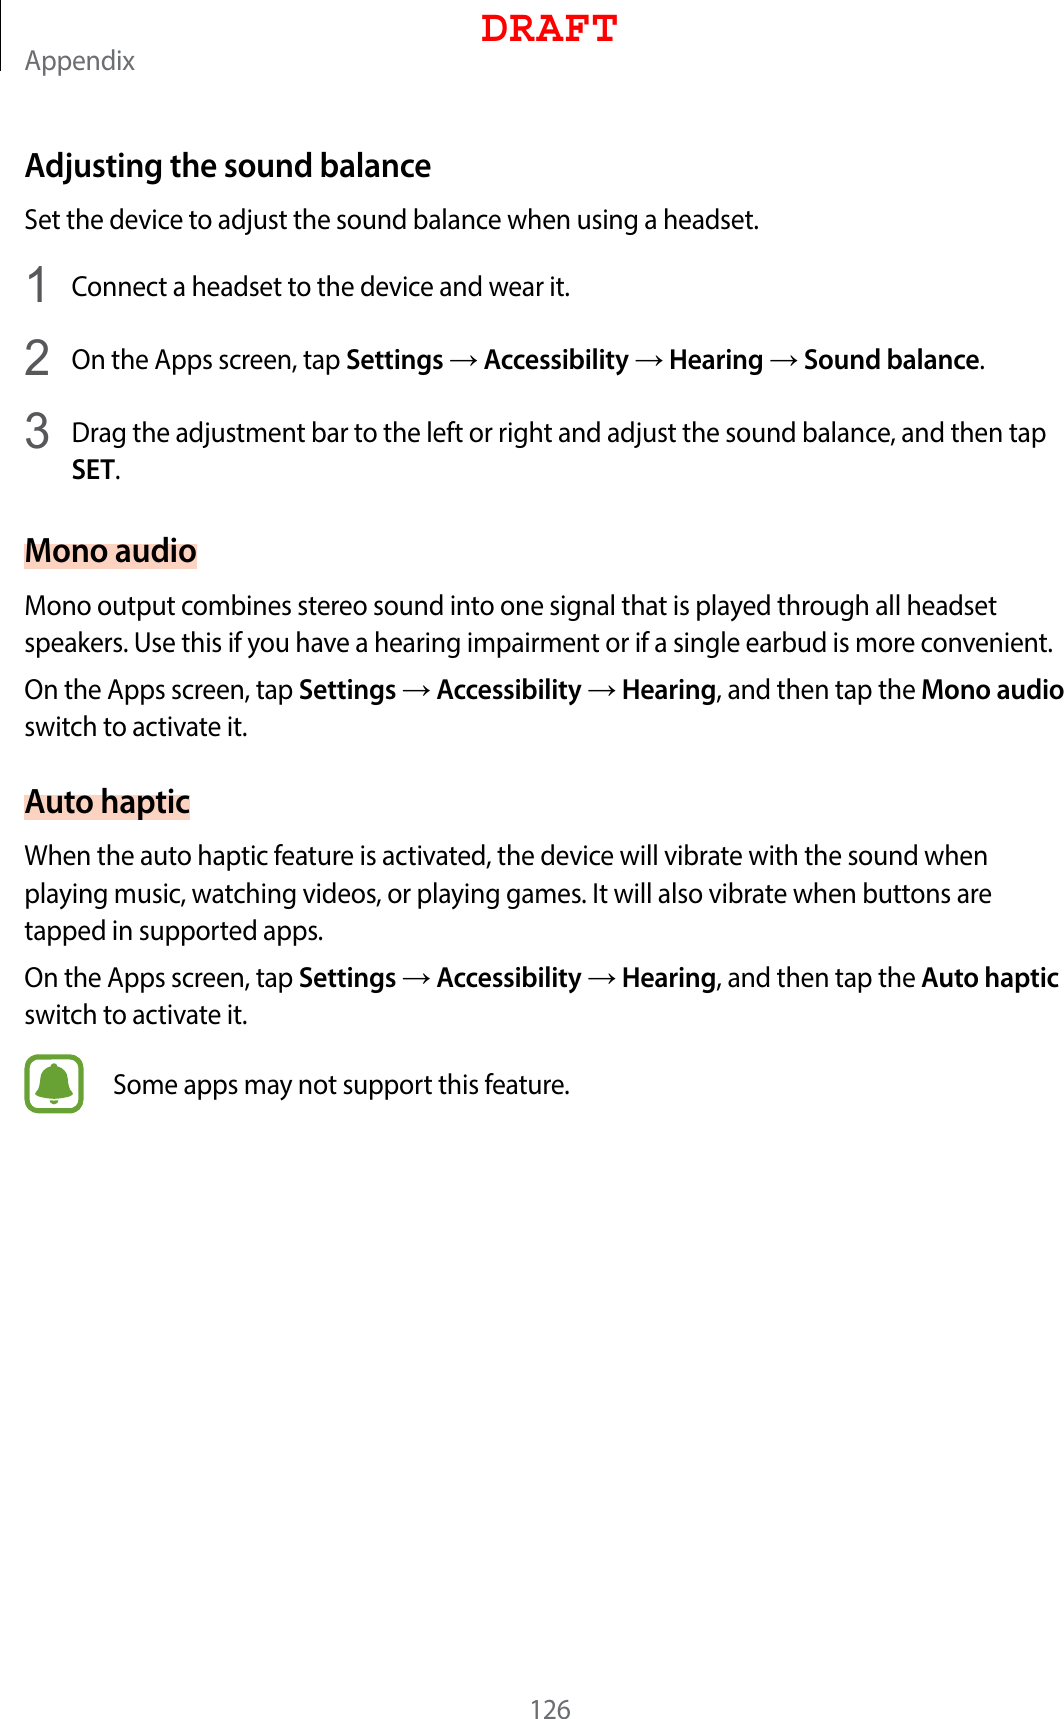 Appendix126Adjusting the sound balanceSet the device to adjust the sound balance when using a headset.1  Connect a headset to the device and wear it.2  On the Apps screen, tap Settings  Accessibility  Hearing  Sound balance.3  Drag the adjustment bar to the left or right and adjust the sound balance, and then tap SET.Mono audioMono output combines stereo sound into one signal that is played through all headset speakers. Use this if you have a hearing impairment or if a single earbud is more convenient.On the Apps screen, tap Settings  Accessibility  Hearing, and then tap the Mono audio switch to activate it.Auto hapticWhen the auto haptic feature is activated, the device will vibrate with the sound when playing music, watching videos, or playing games. It will also vibrate when buttons are tapped in supported apps.On the Apps screen, tap Settings  Accessibility  Hearing, and then tap the Auto haptic switch to activate it.Some apps may not support this feature.DRAFT